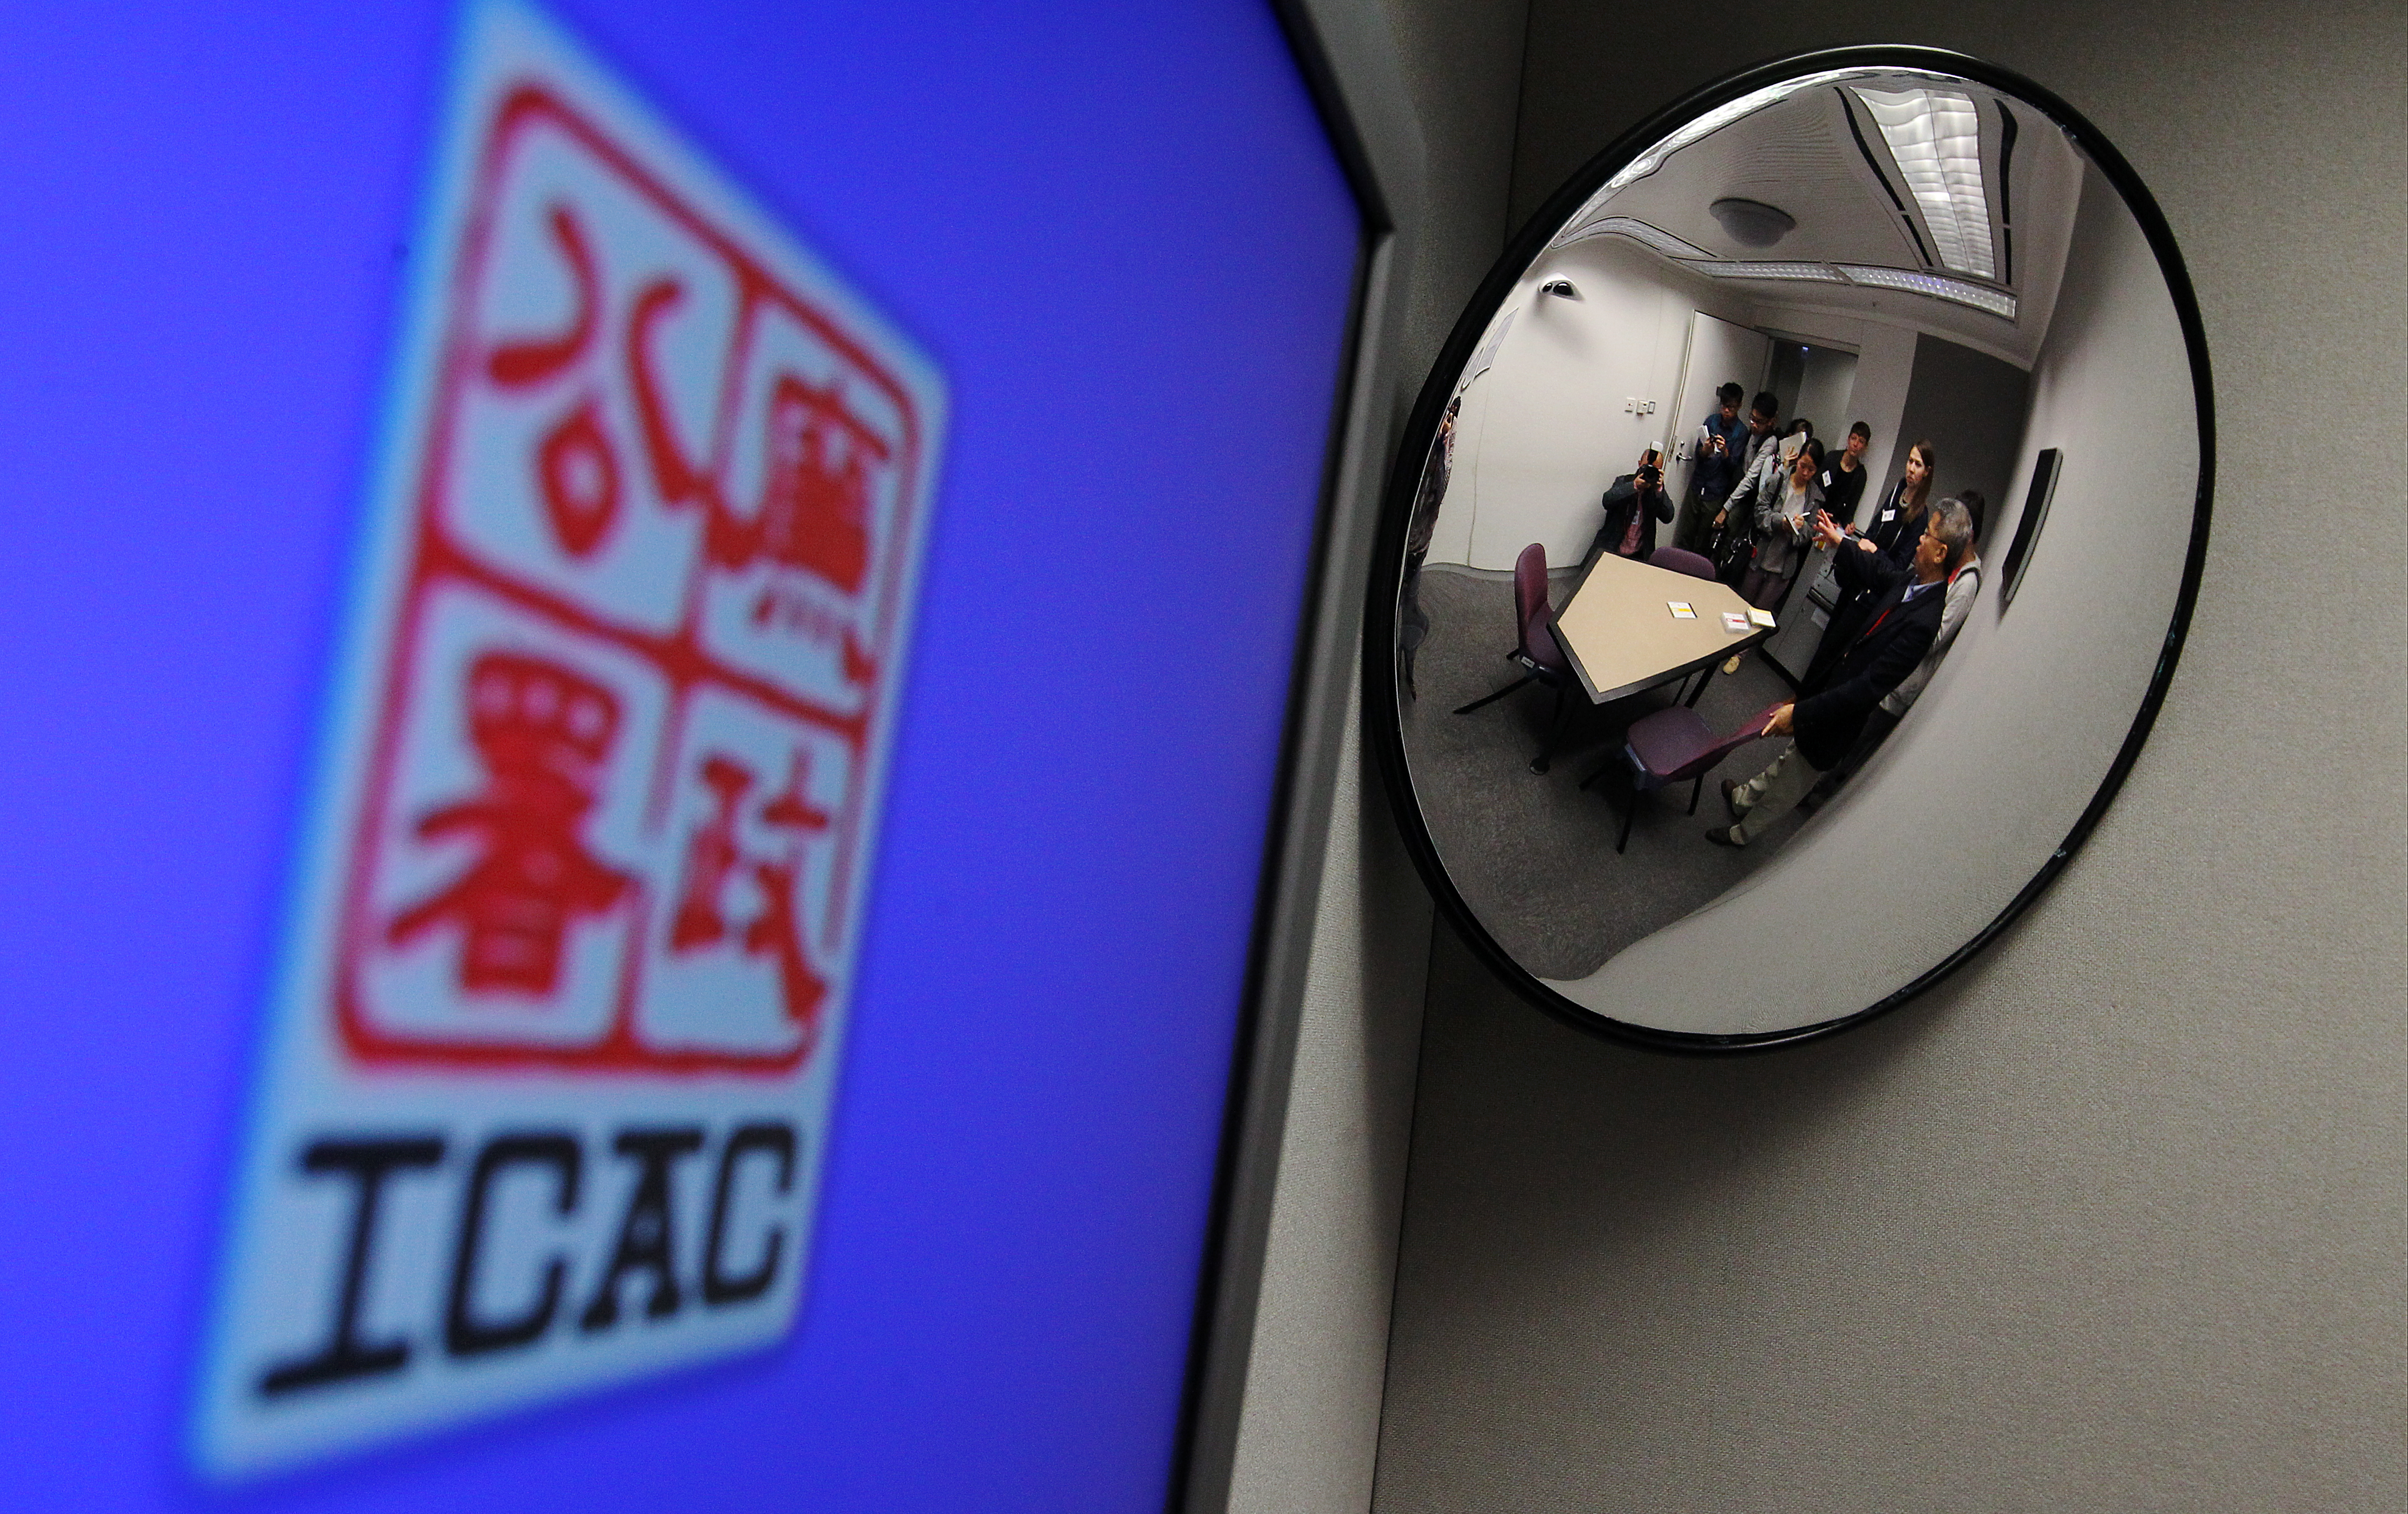 Inside the ICAC headquarters in North Point. Photo: Felix Wong